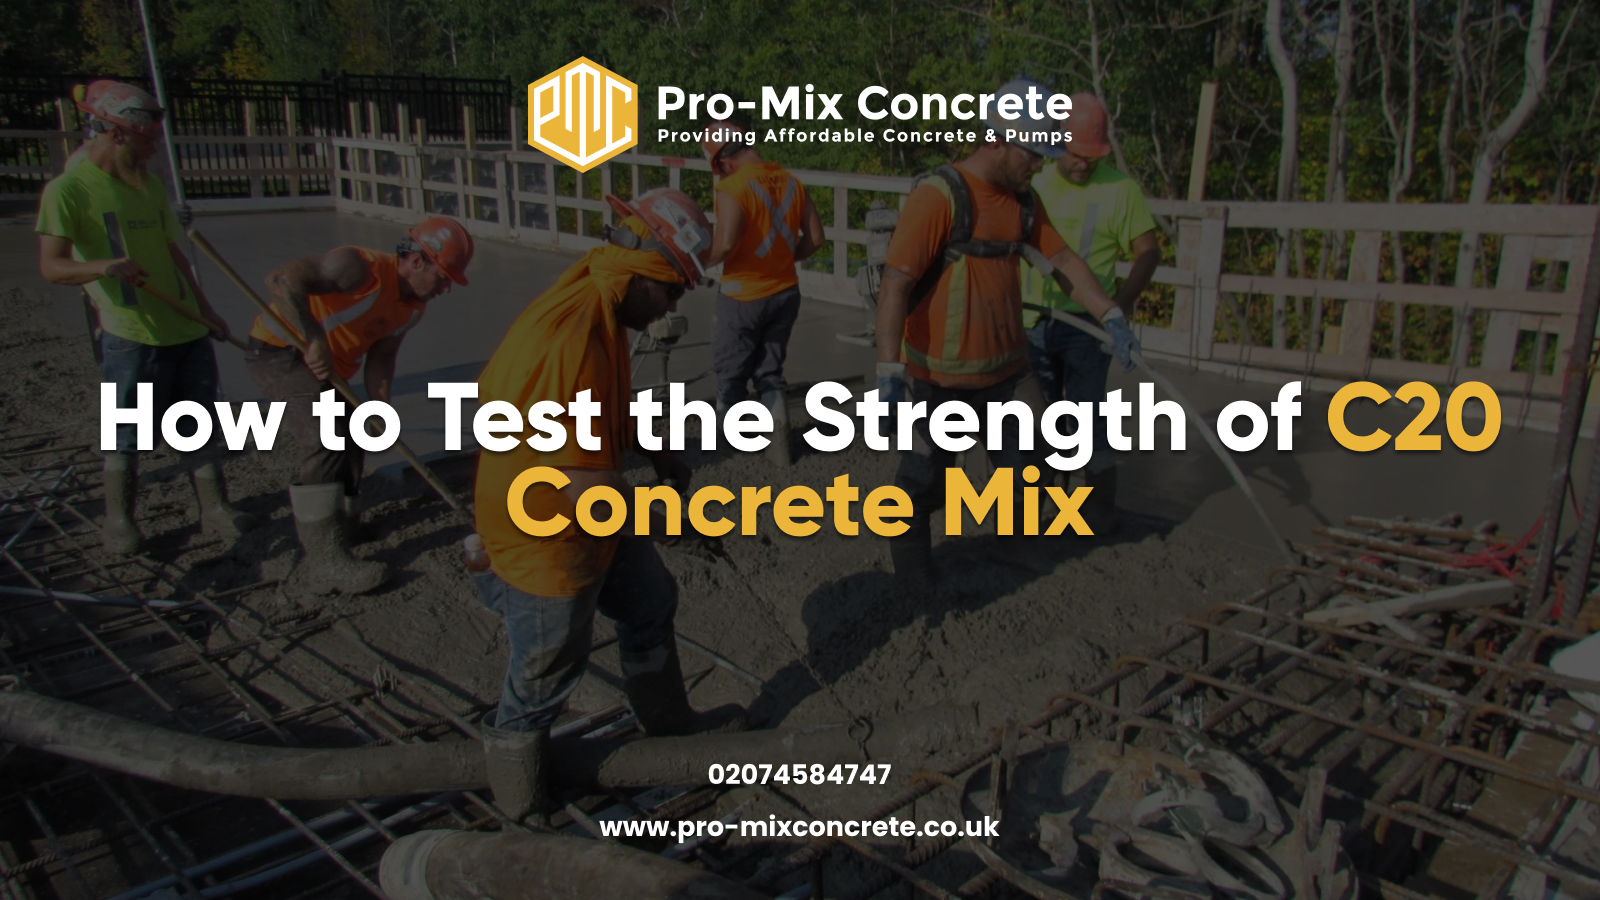 How to Test the Strength of C20 Concrete Mix